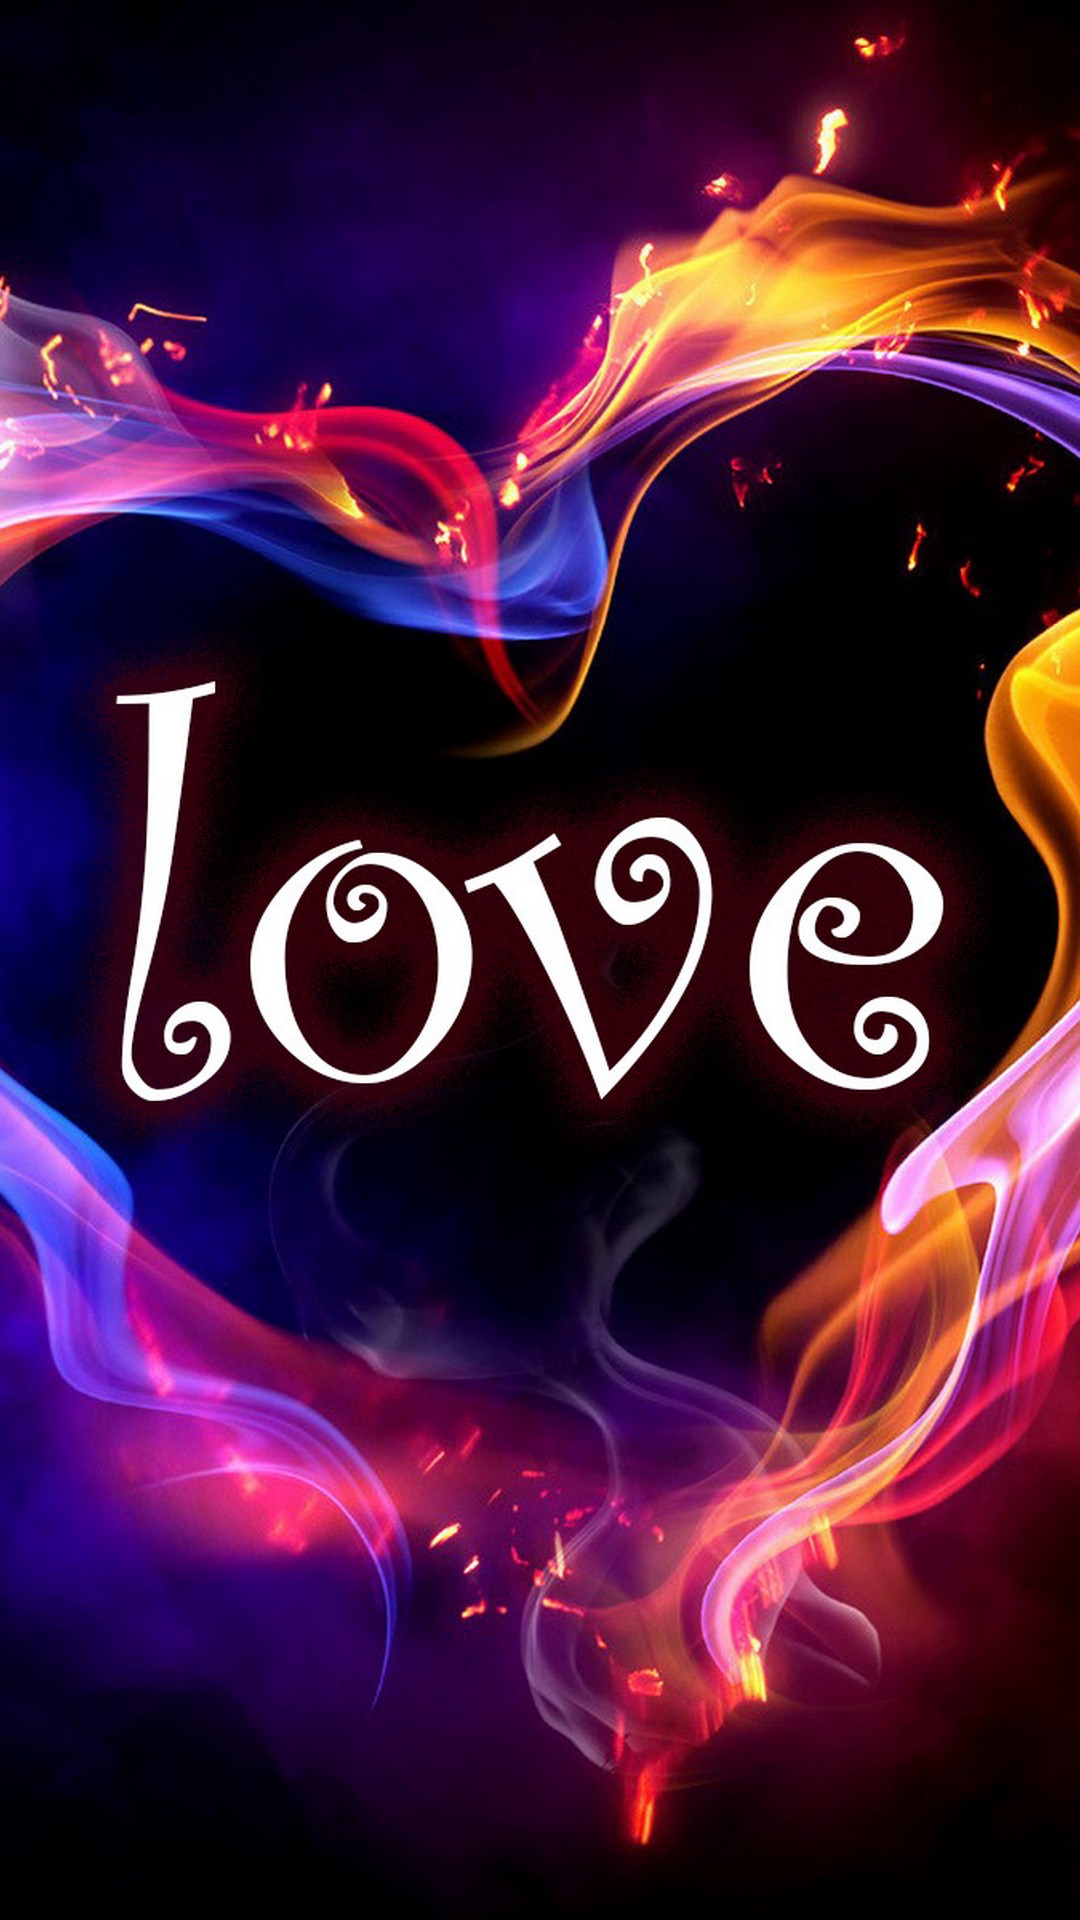 Love HD Wallpaper For Android